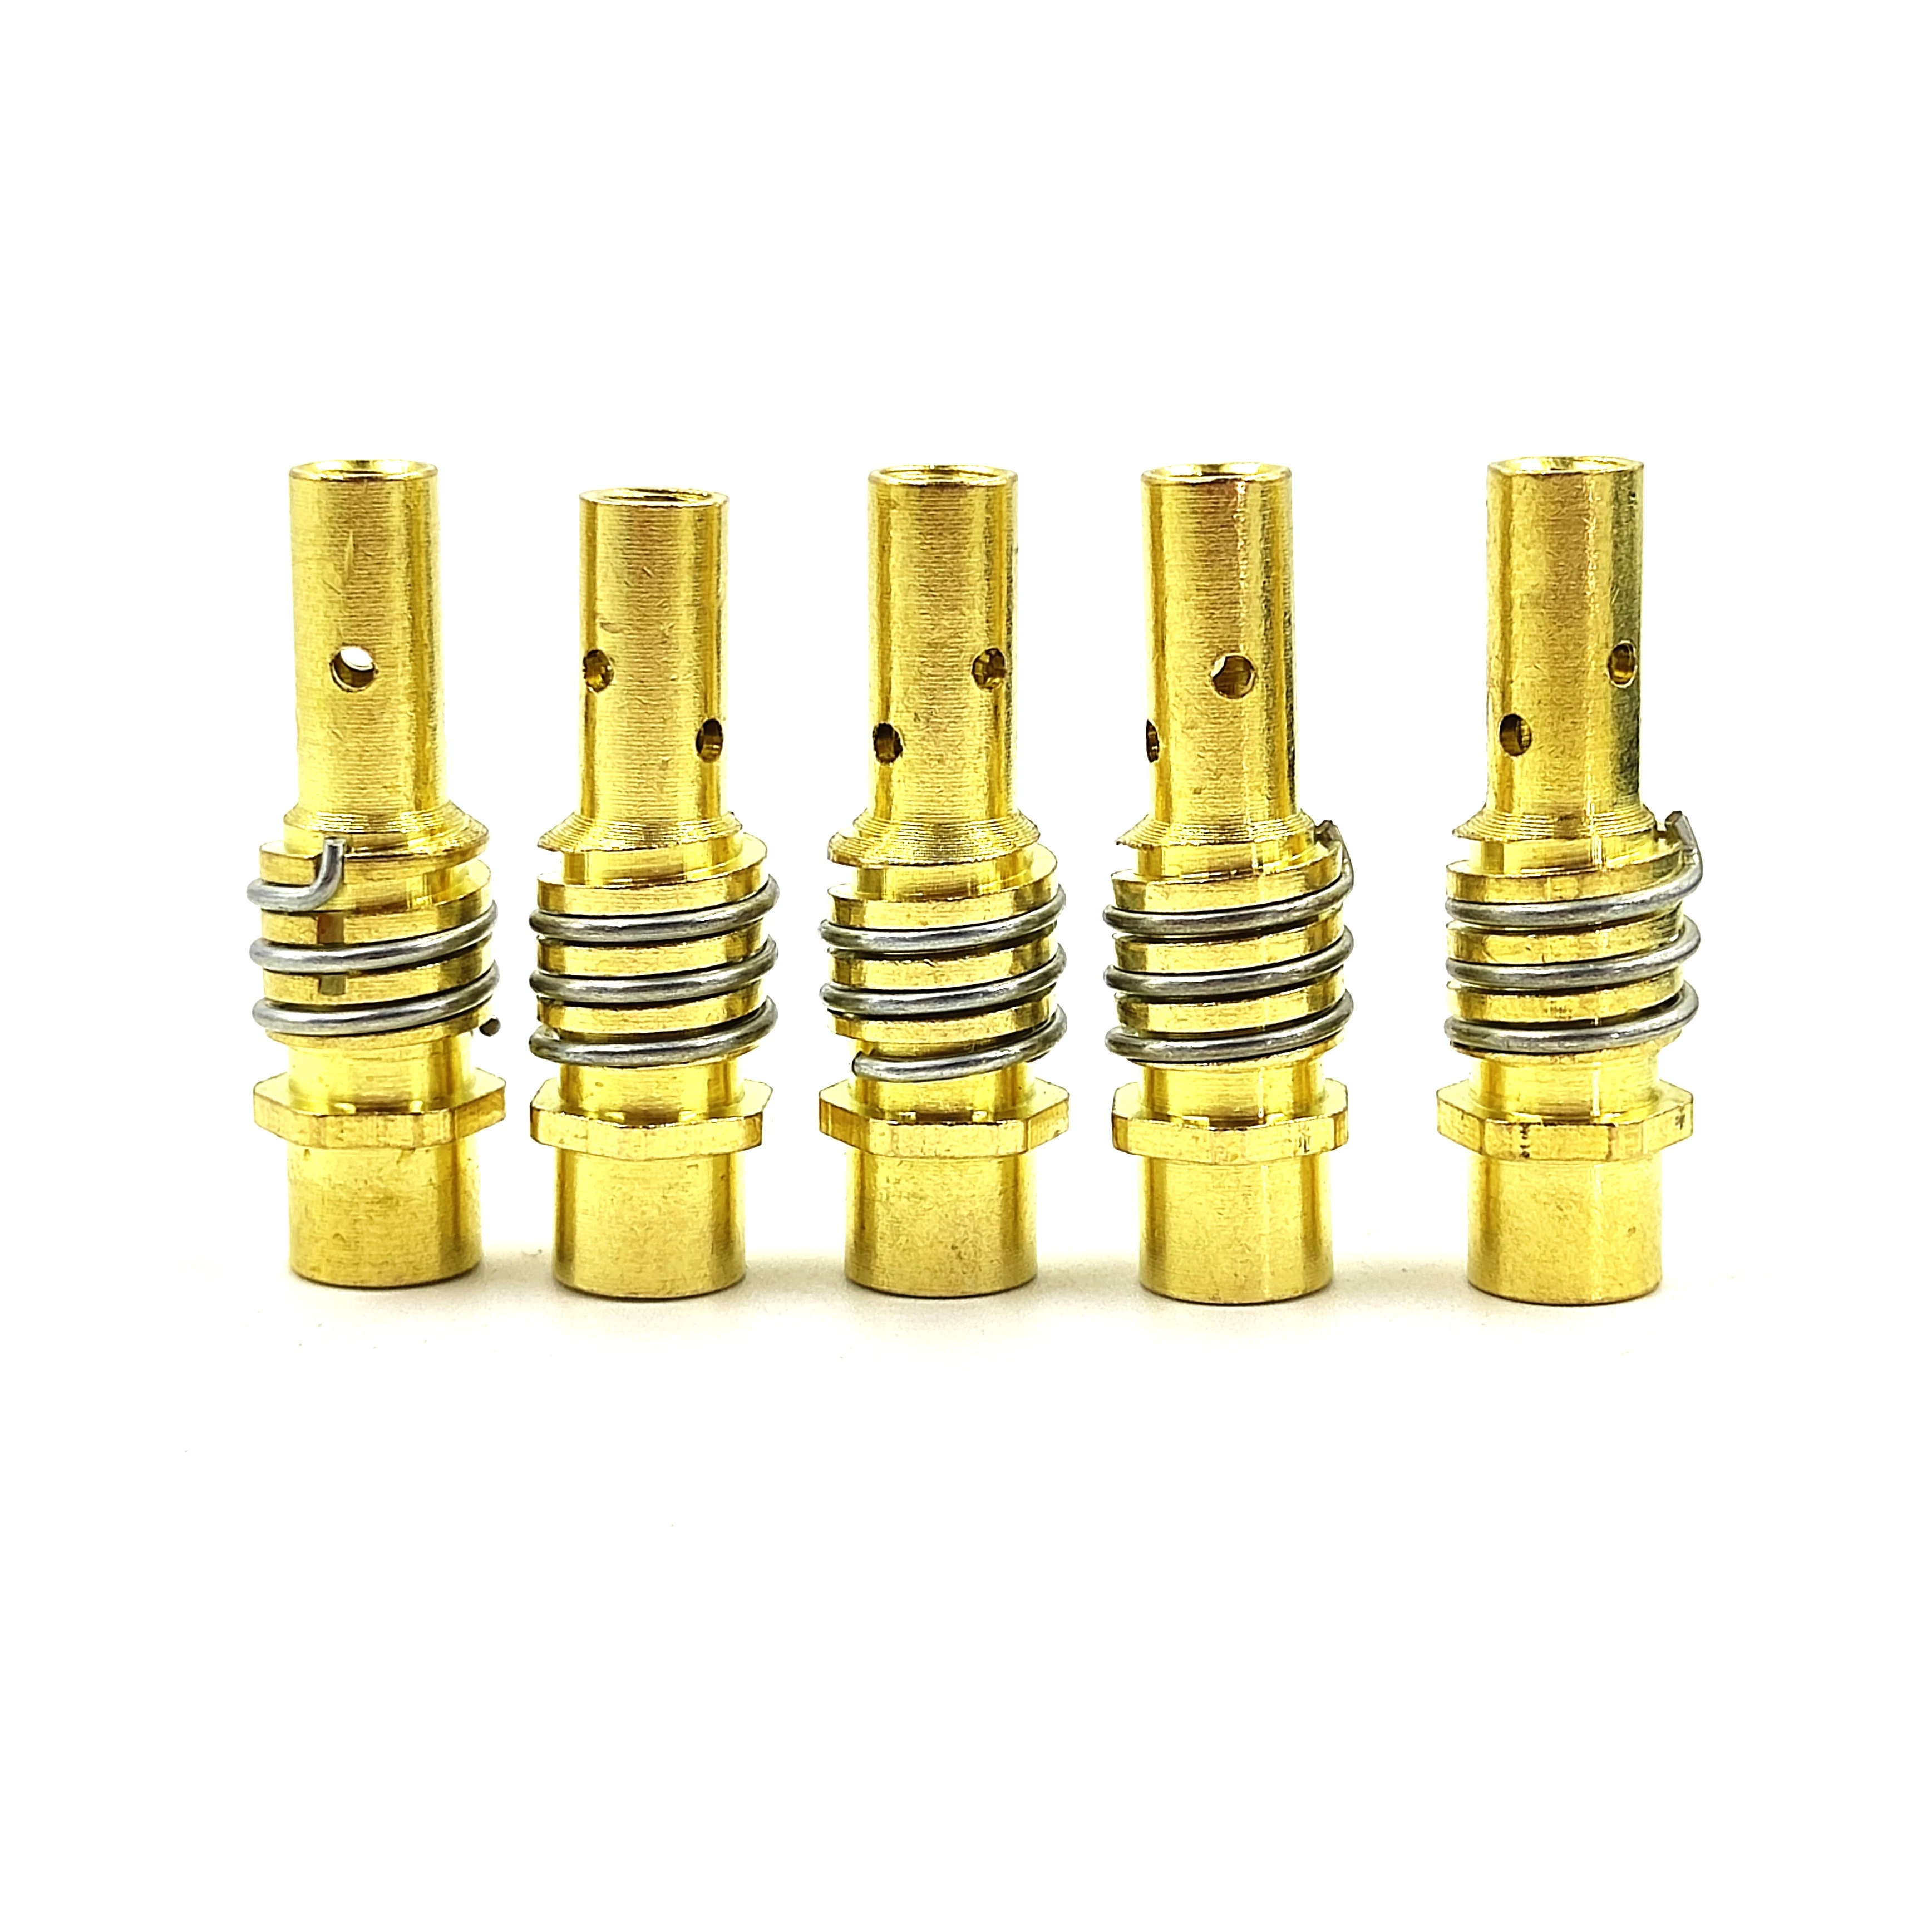 5Piece 15AK MIG/MAG Welding Torch Contact Tip Gas Nozzle Wired Brass 1.0 NEW 